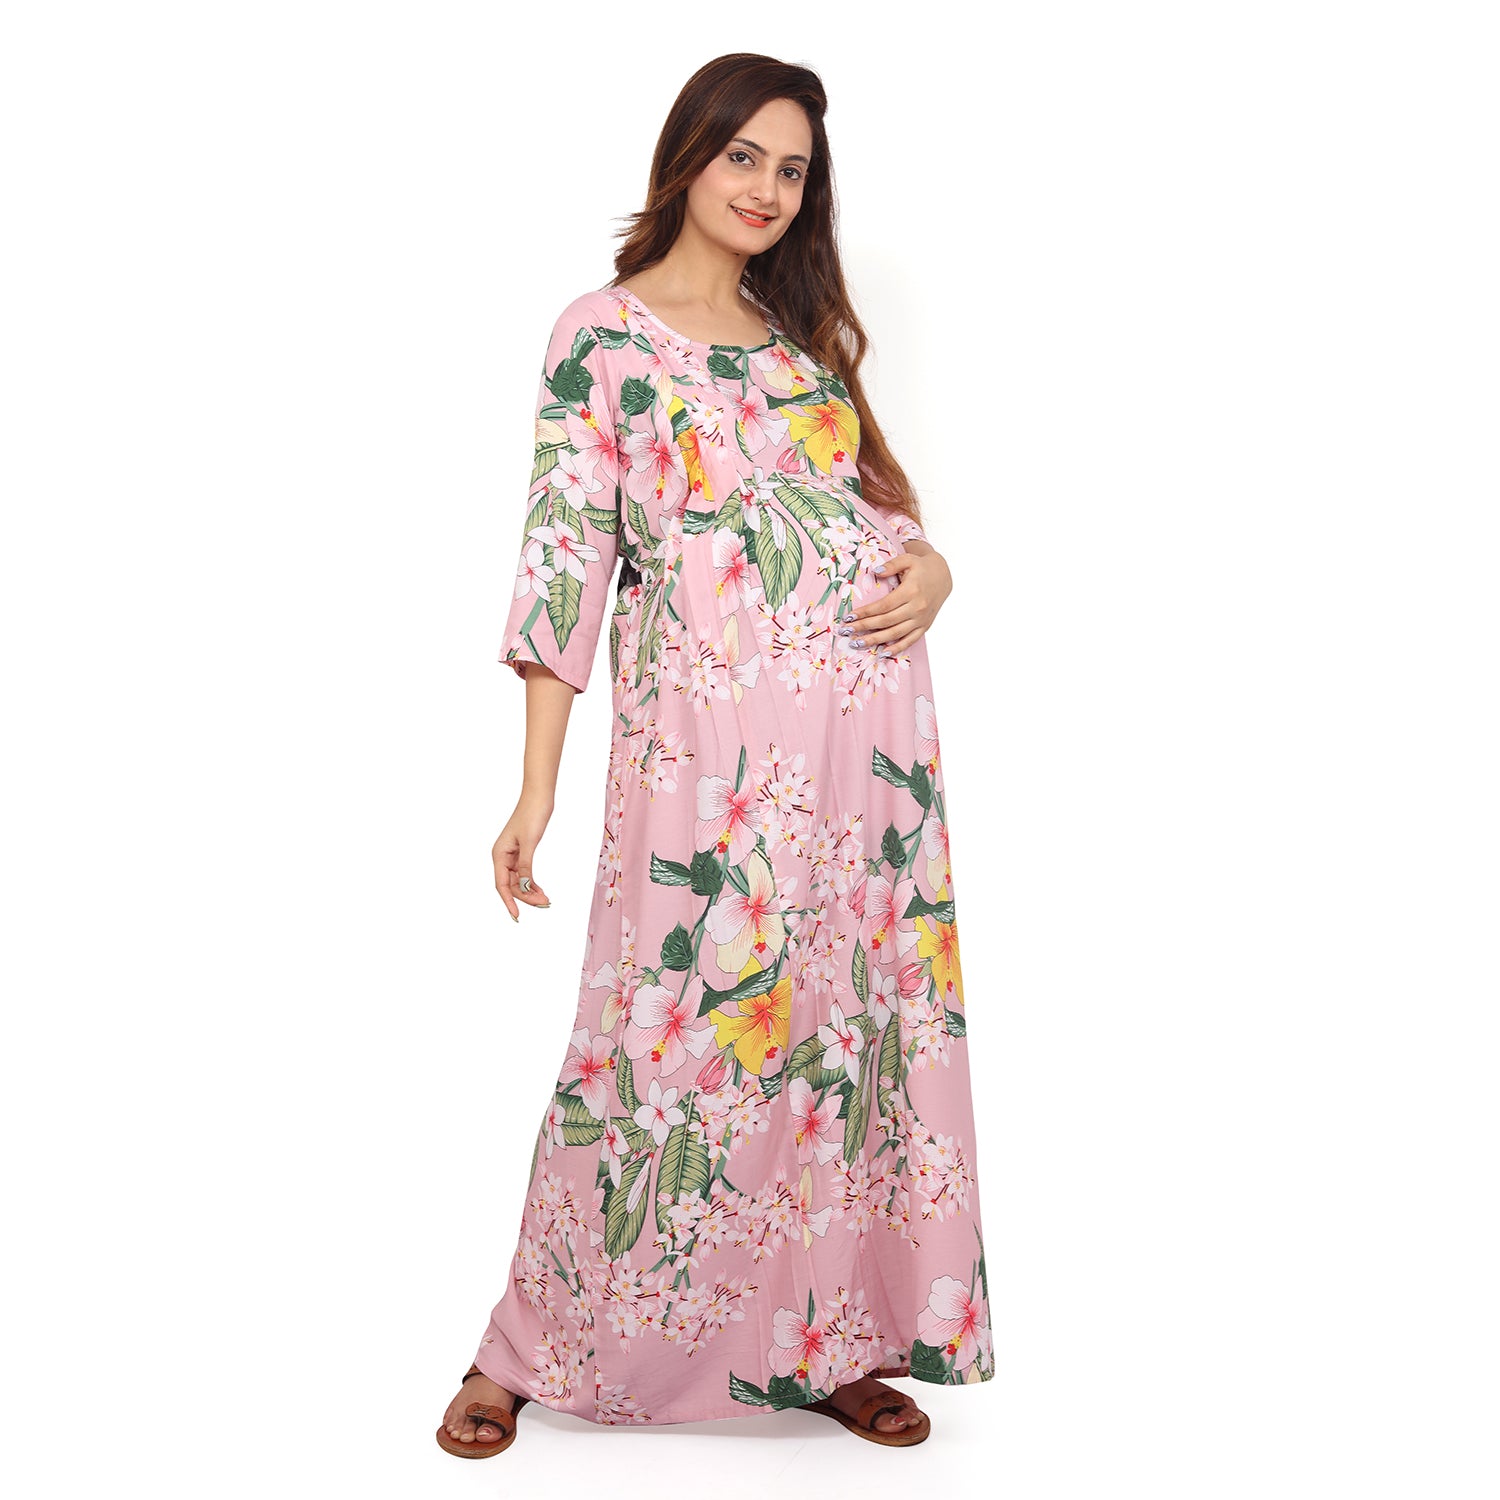 Baby Moo Full Length Comfortable Nursing And Maternity Dress Floral Lily - Pink - Baby Moo